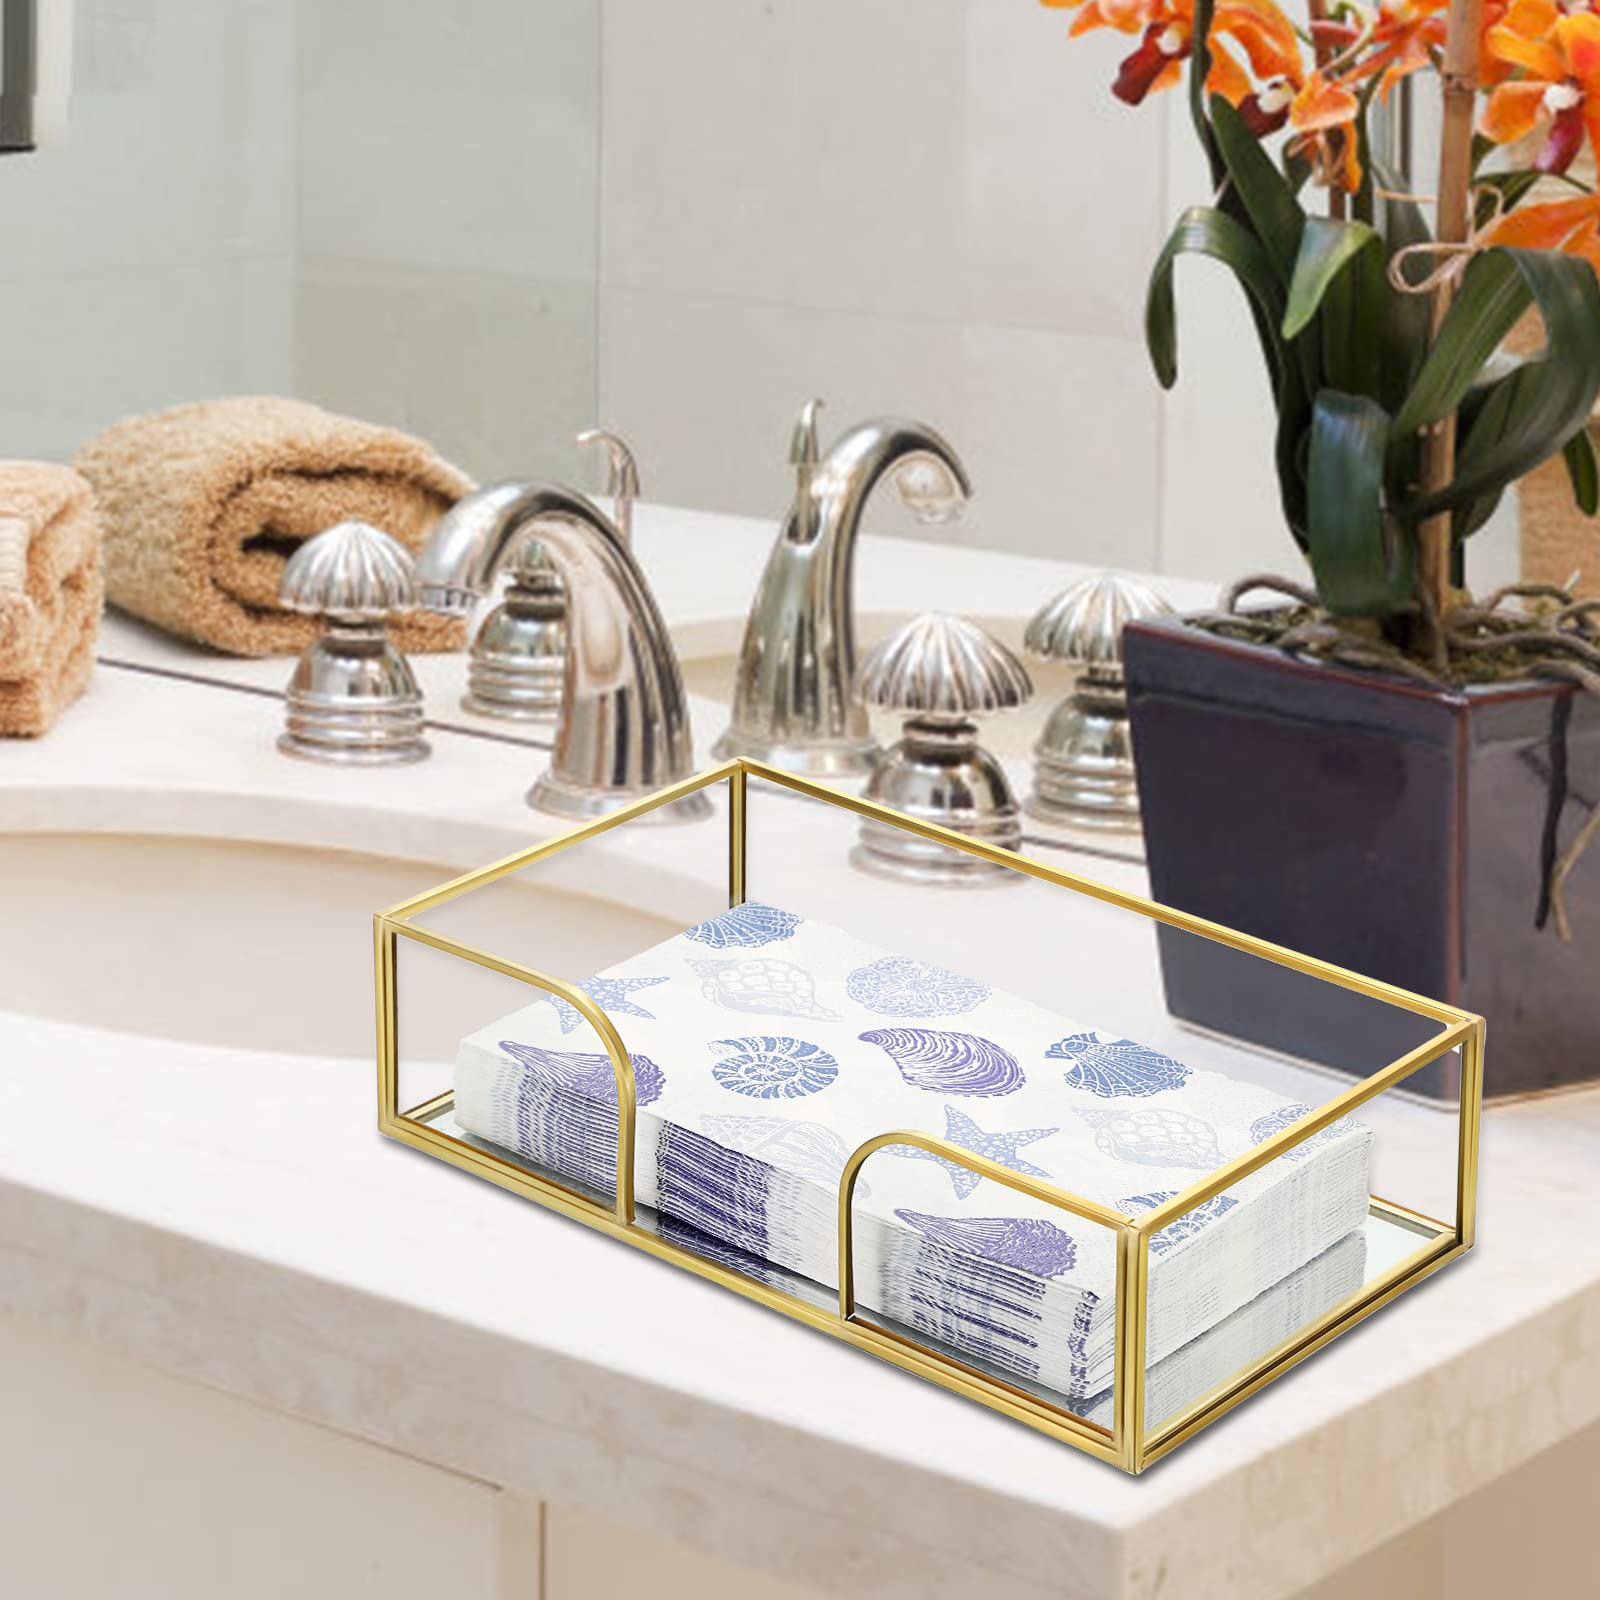 Sumnacon Bathroom Guest Towel Holder - Rectangle Glass Napkin Holder for Guest Hand Towels Paper Napkins, Decorative Napkin Holder Tray for Bathroom Vanity Toilet Tank Table Kitchen Countertop, Gold